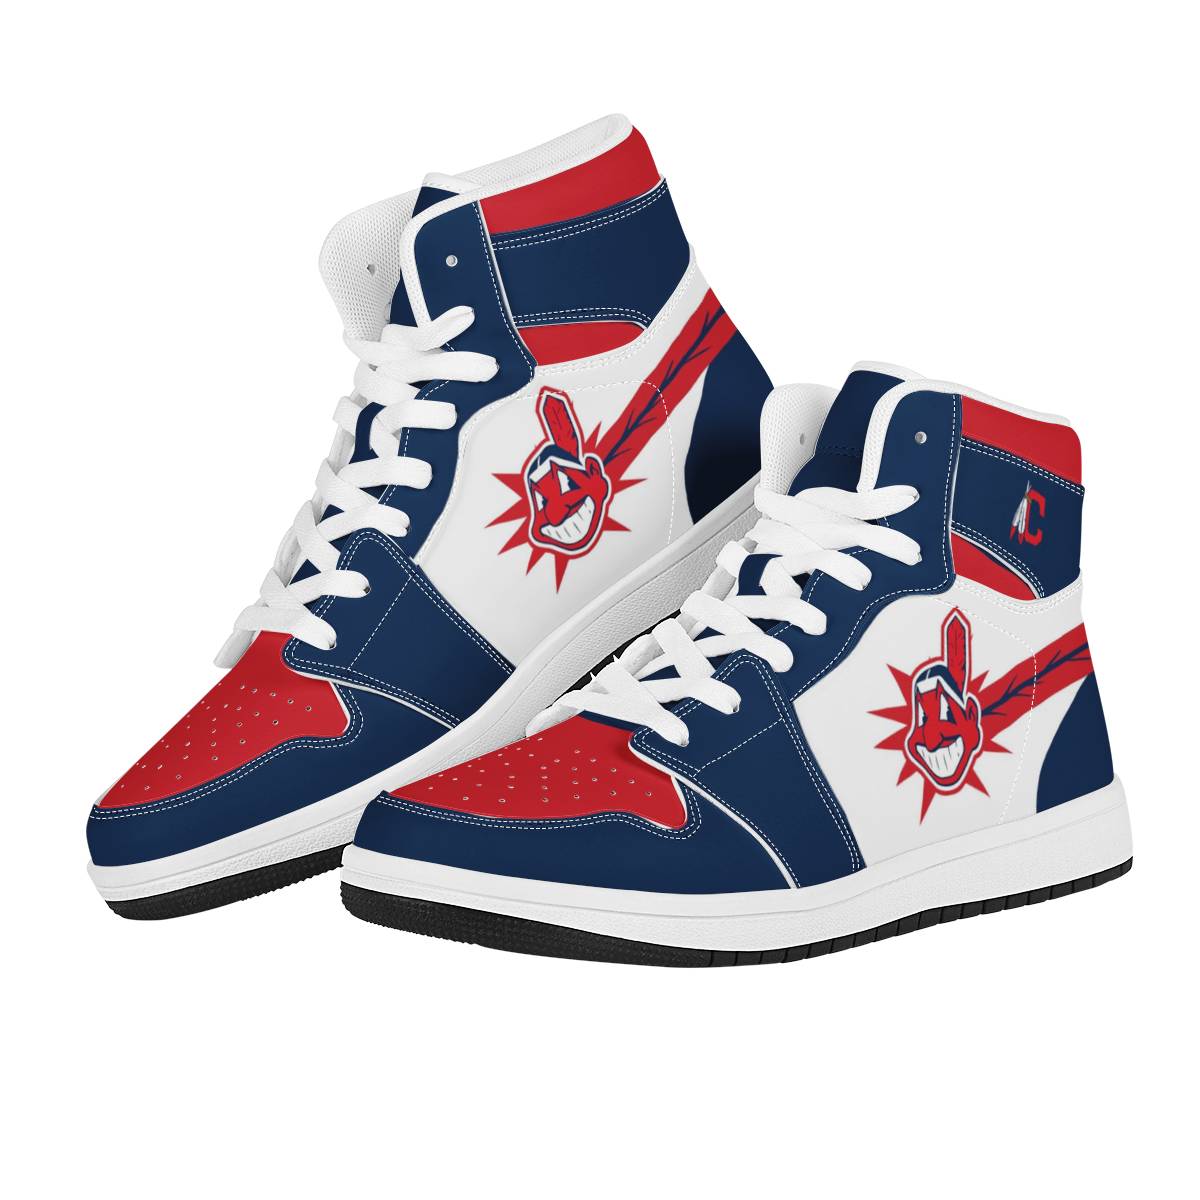 Women's Cleveland Indians High Top Leather AJ1 Sneakers 001